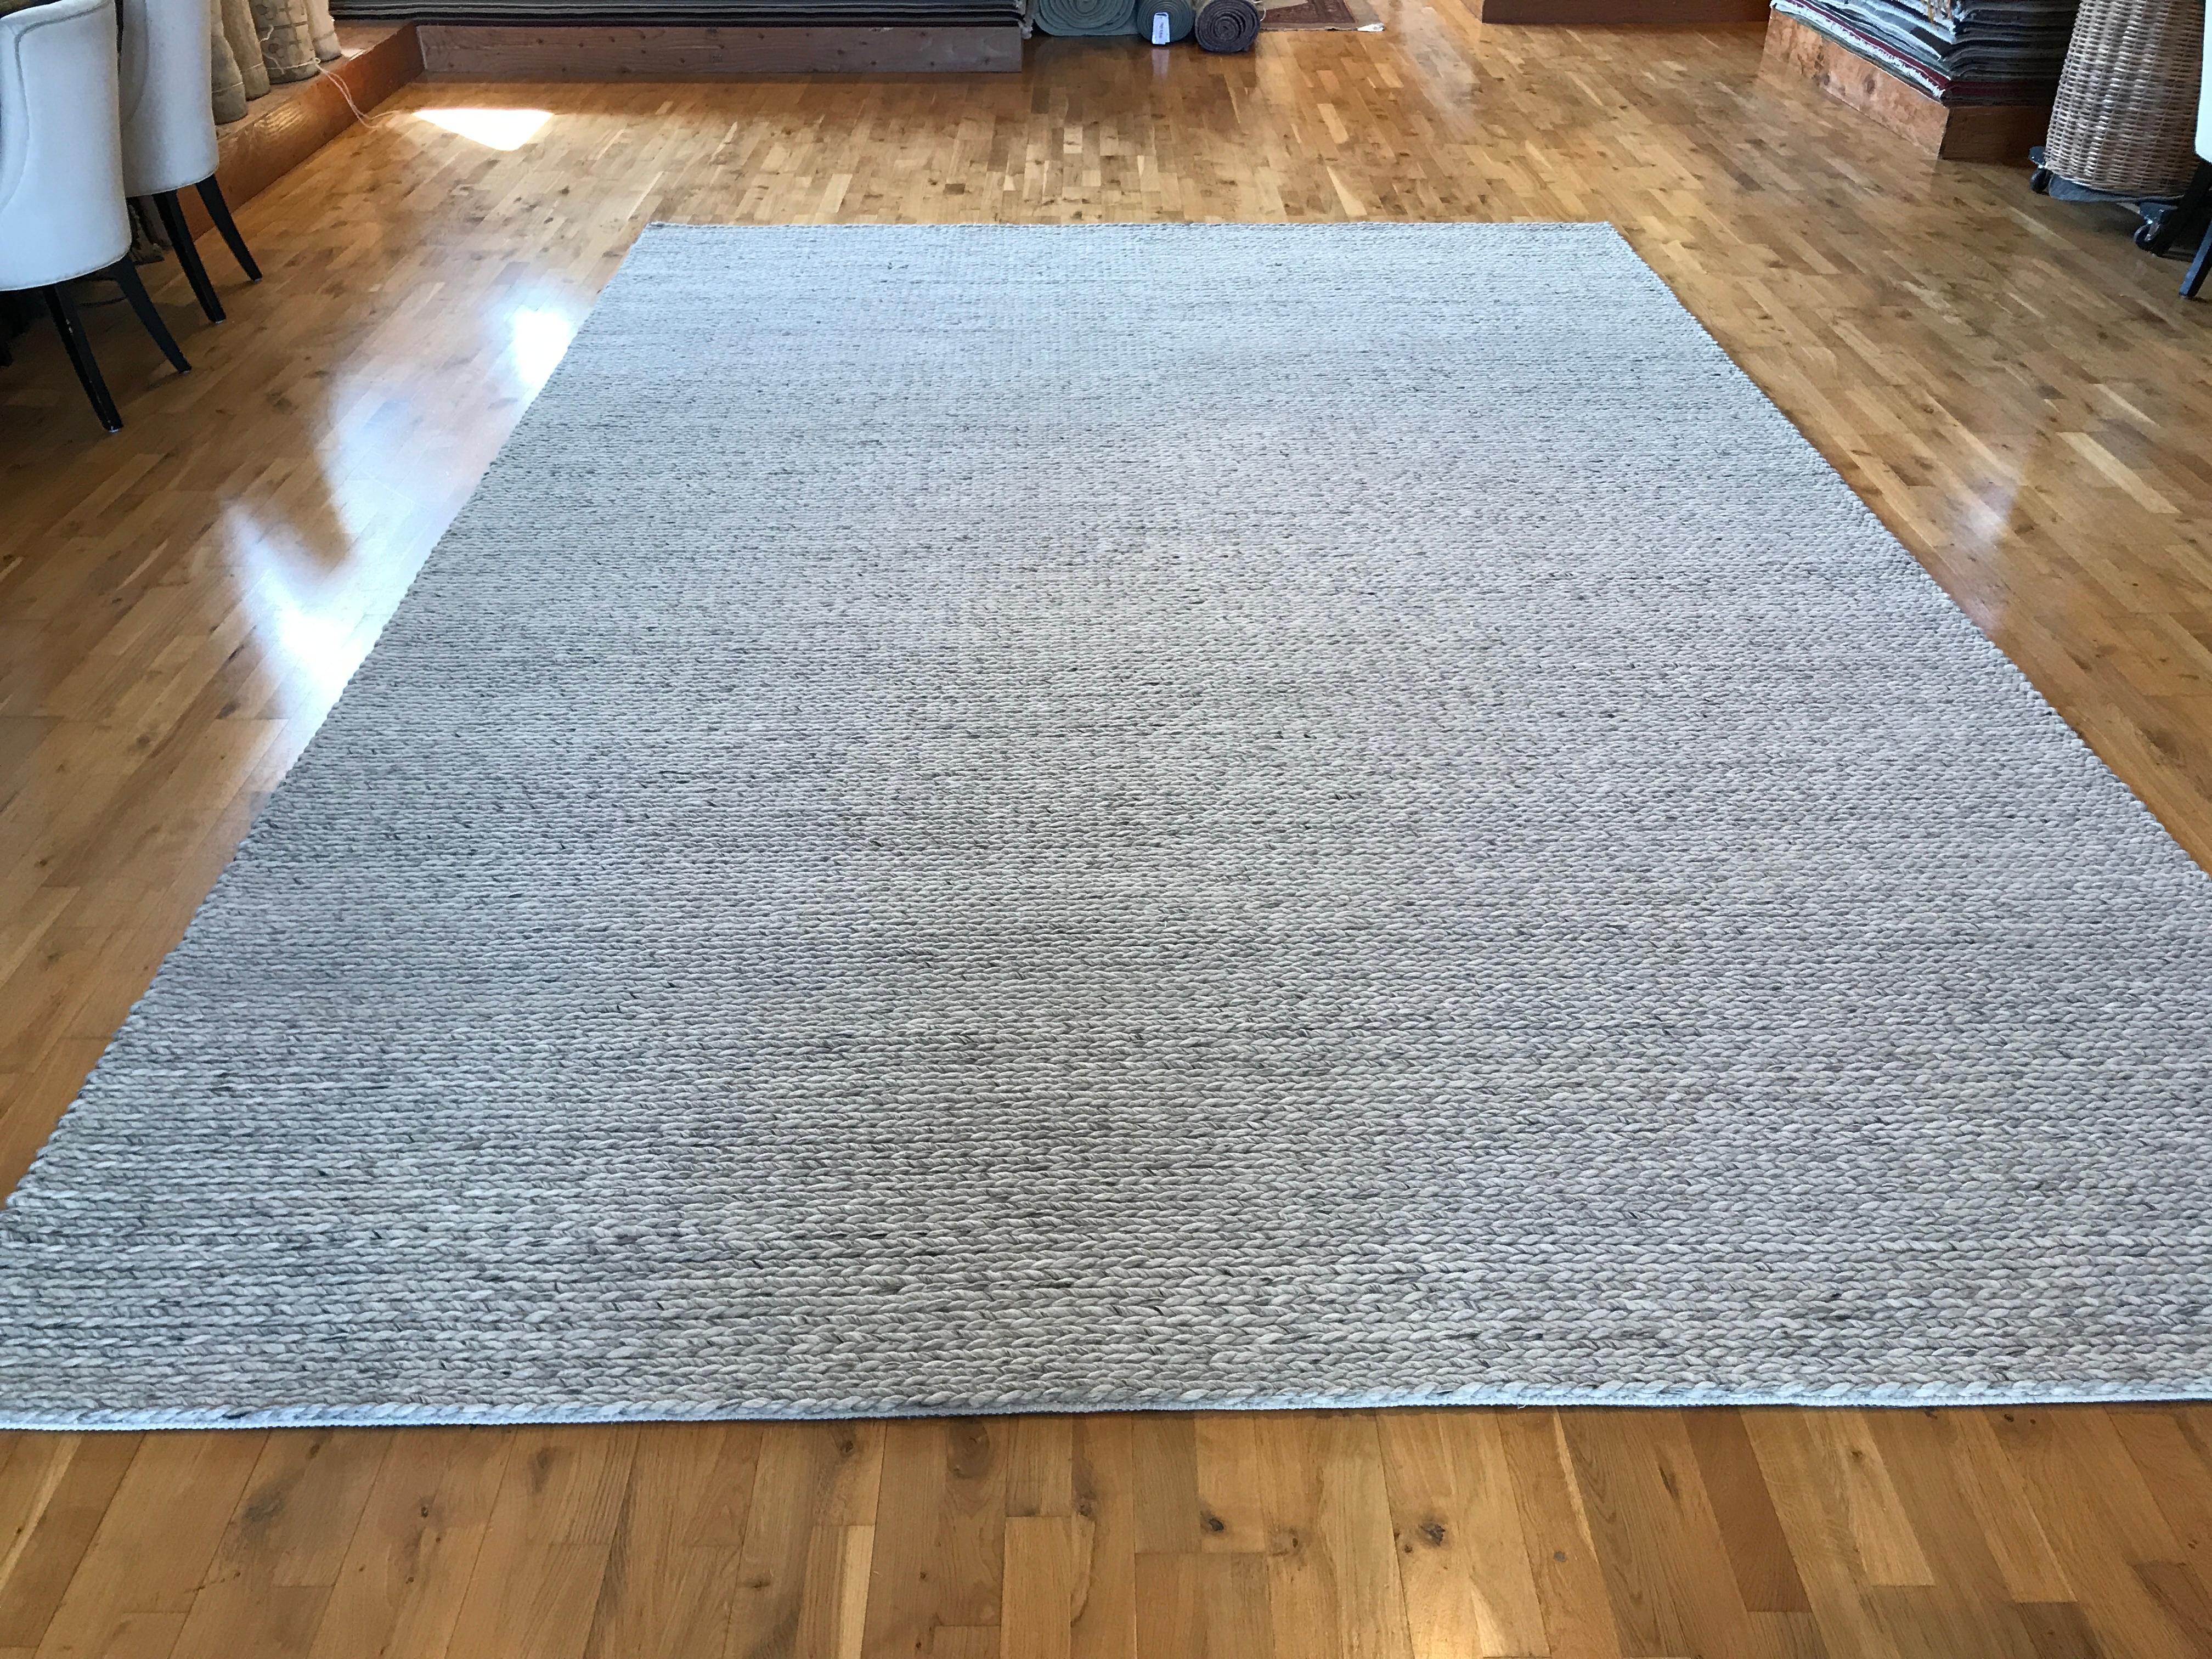 braided area rugs